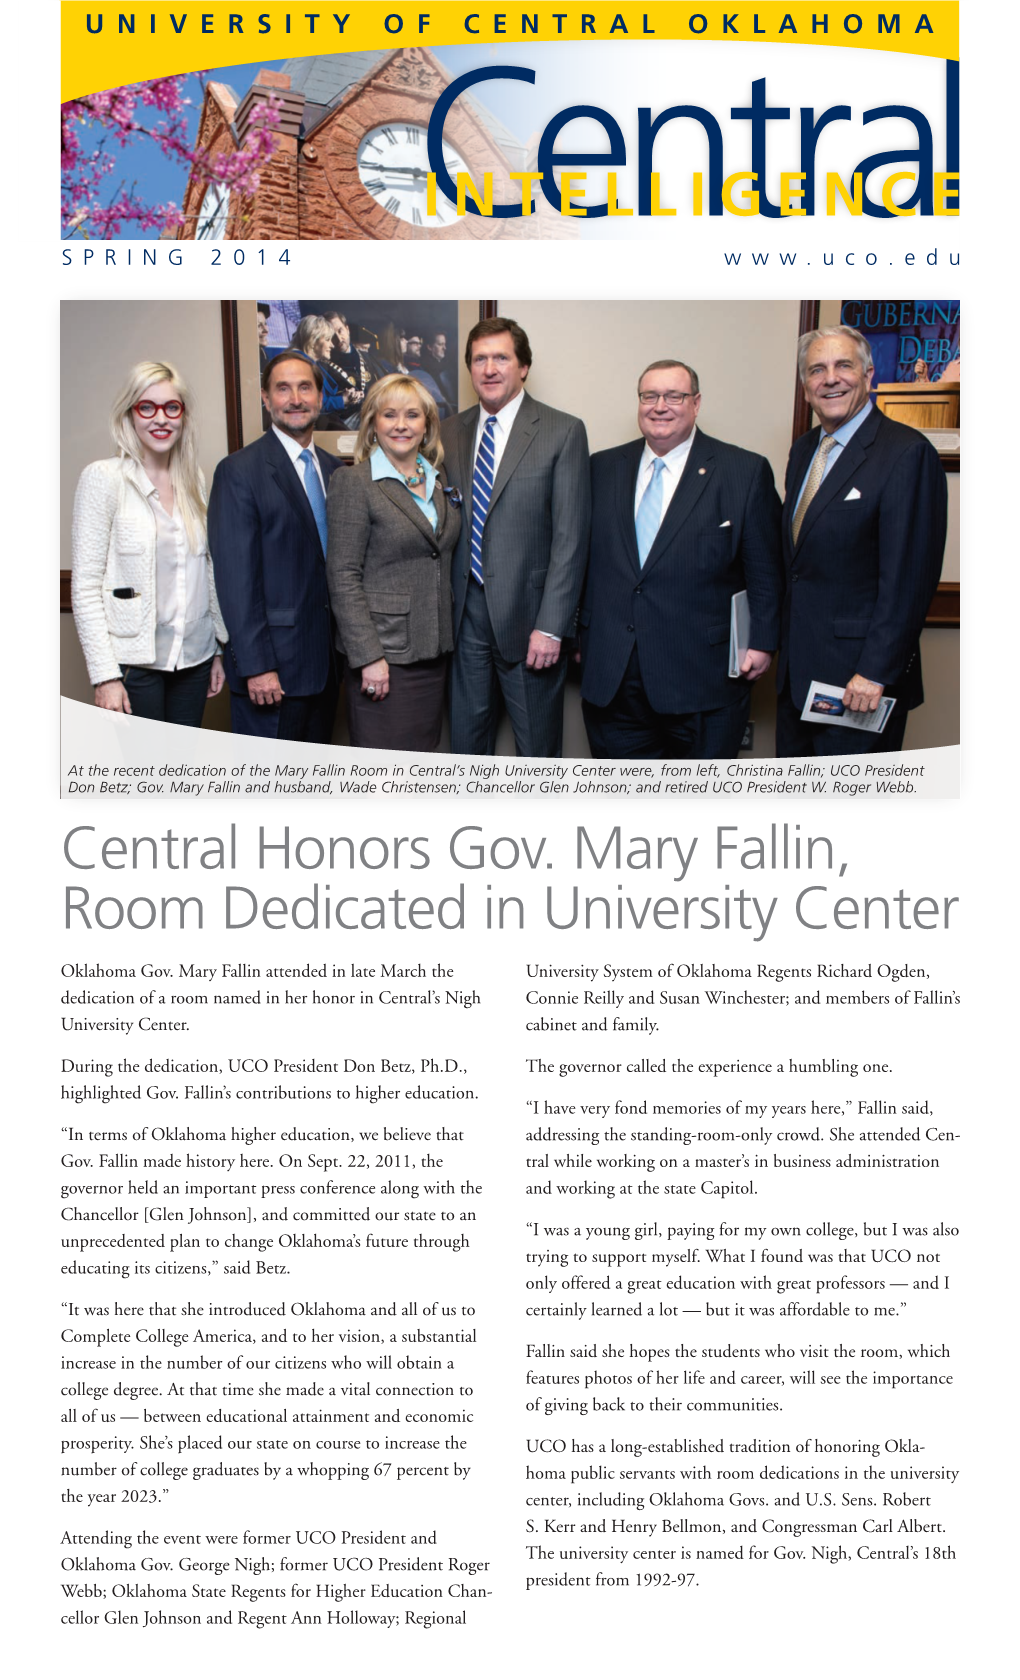 Central Honors Gov. Mary Fallin, Room Dedicated in University Center